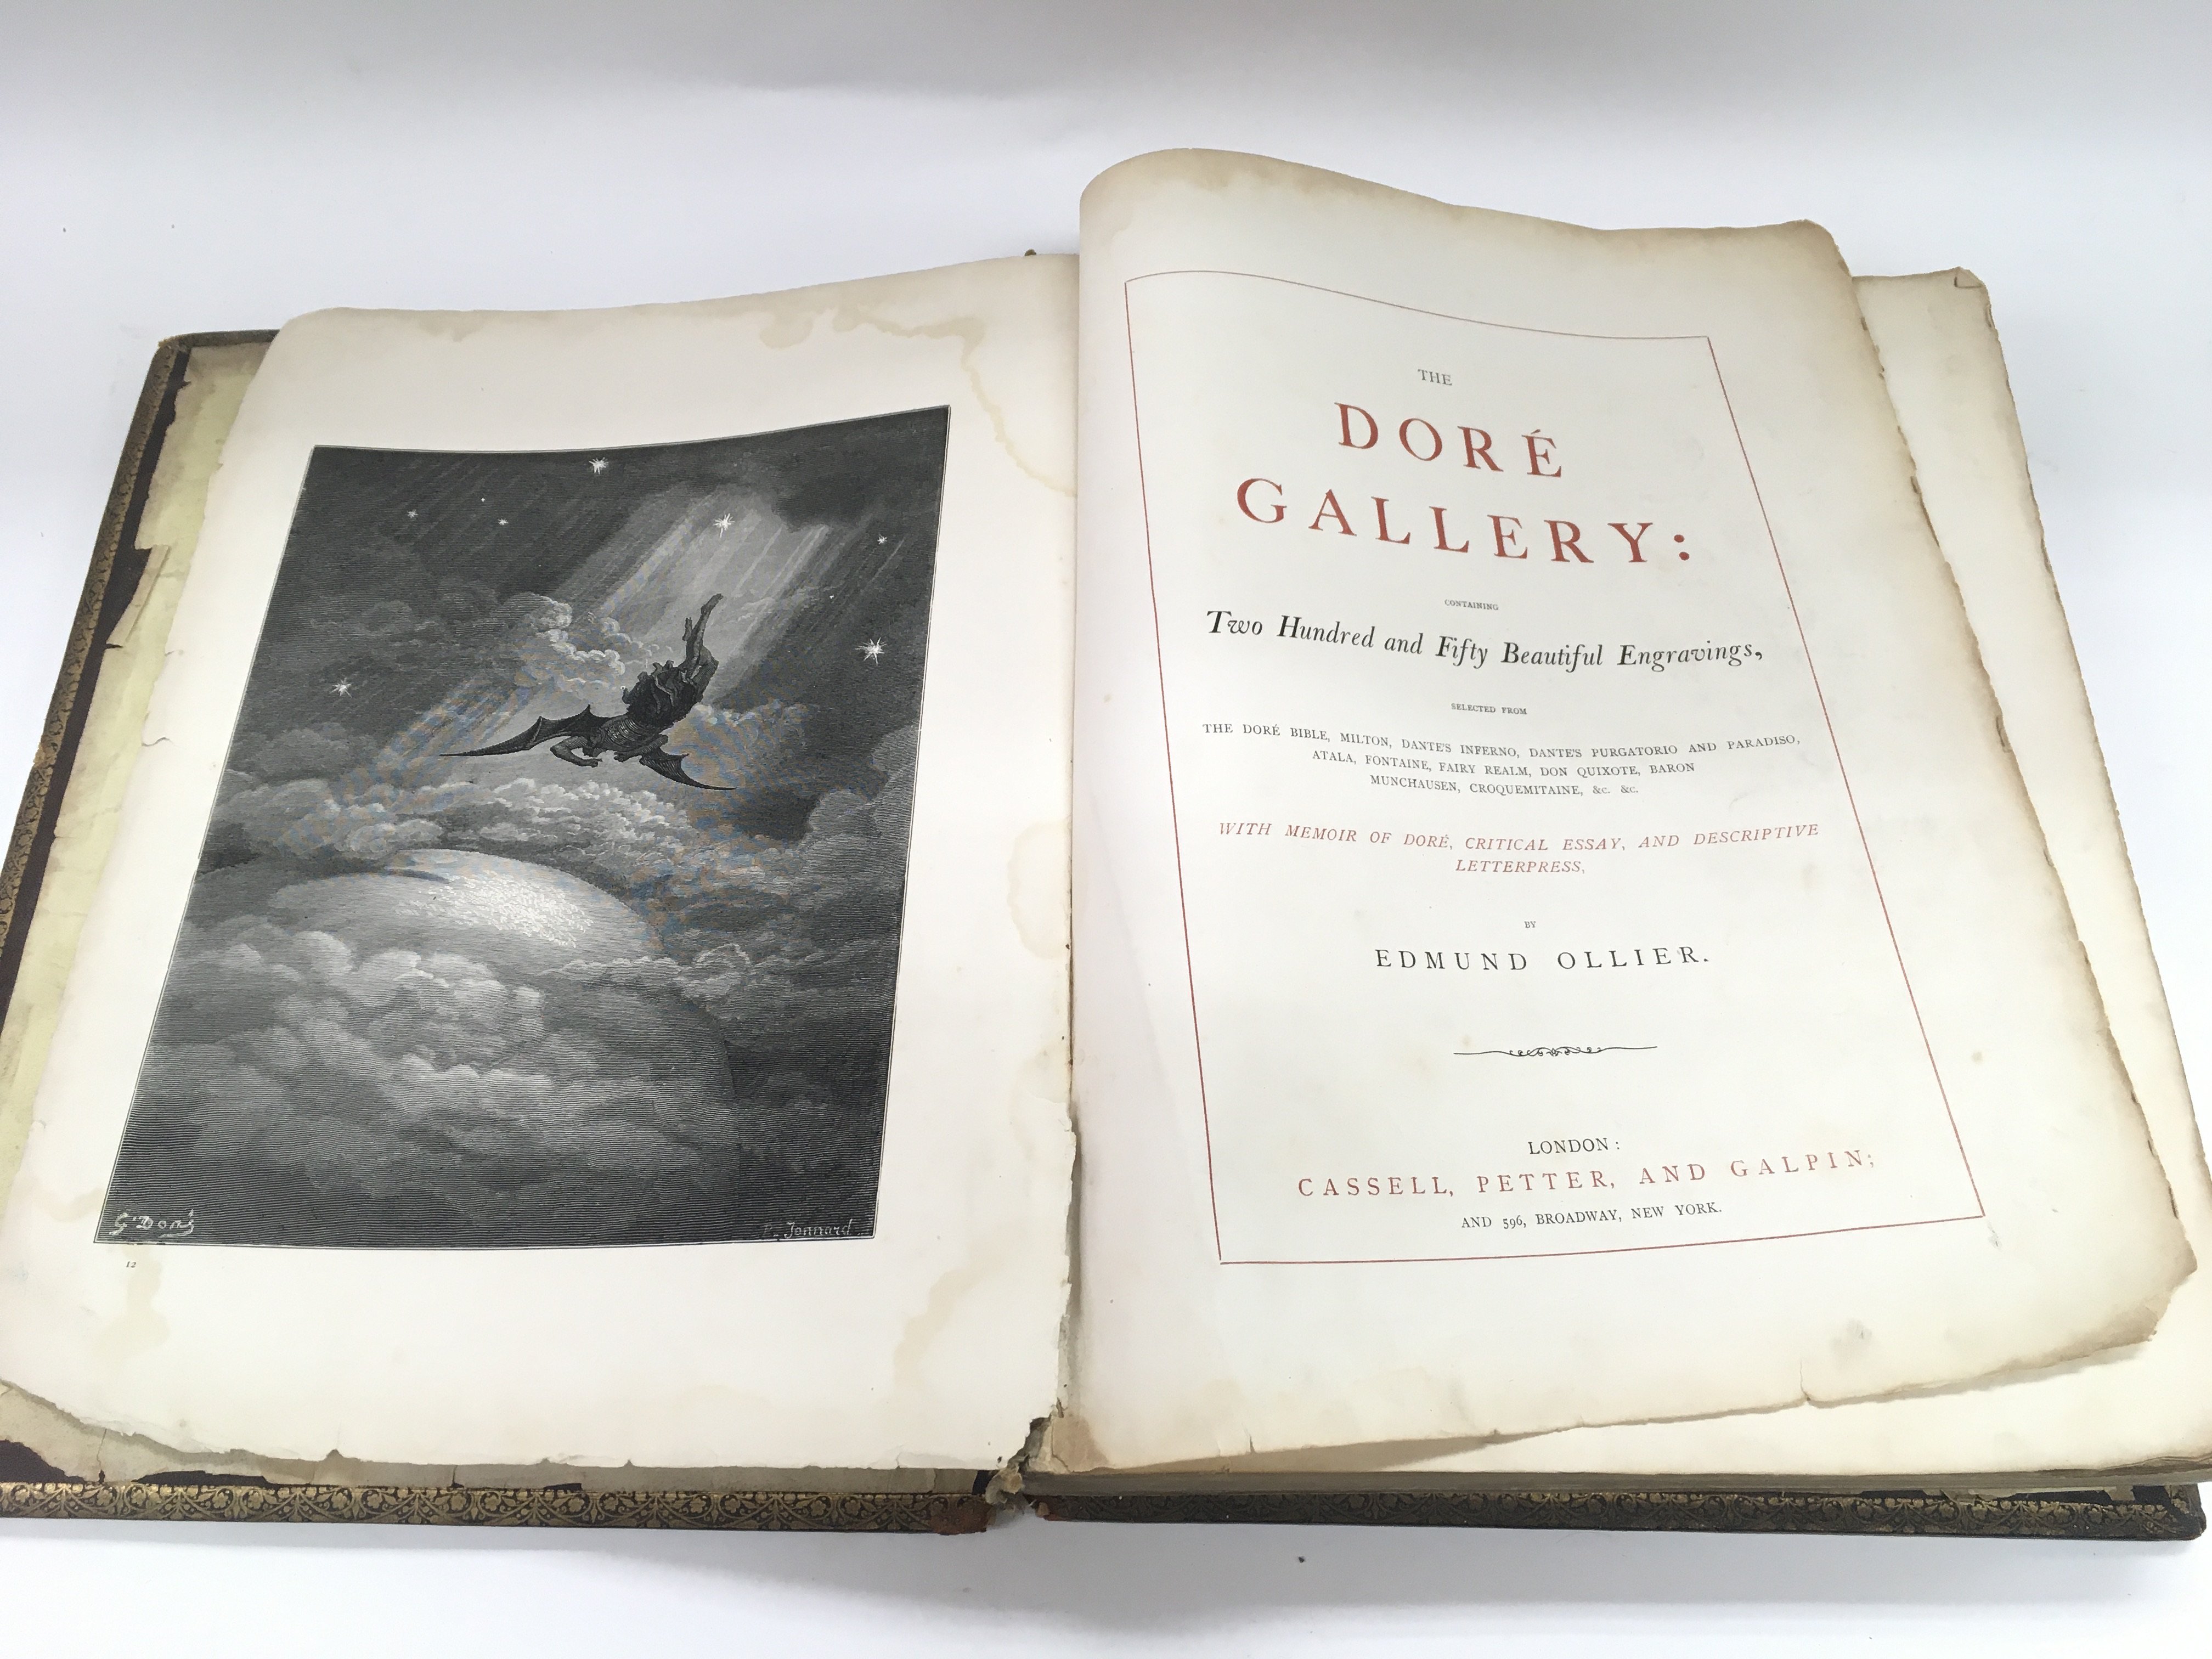 A Victorian book 'The Dore Gallery' containing 250 engravings and published by Cassell, Petter and